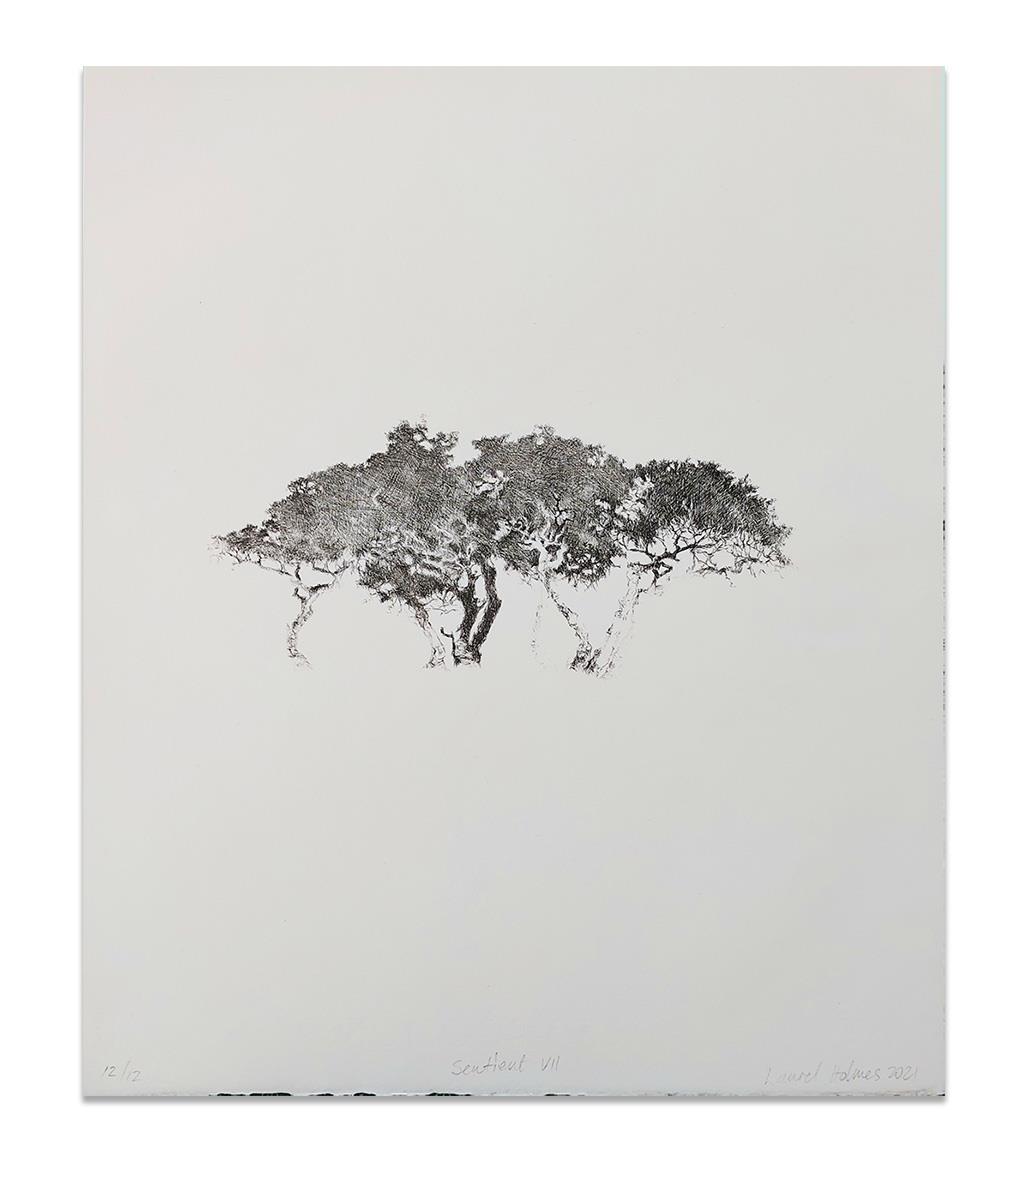 drypoint etching on paper of an acacia tree